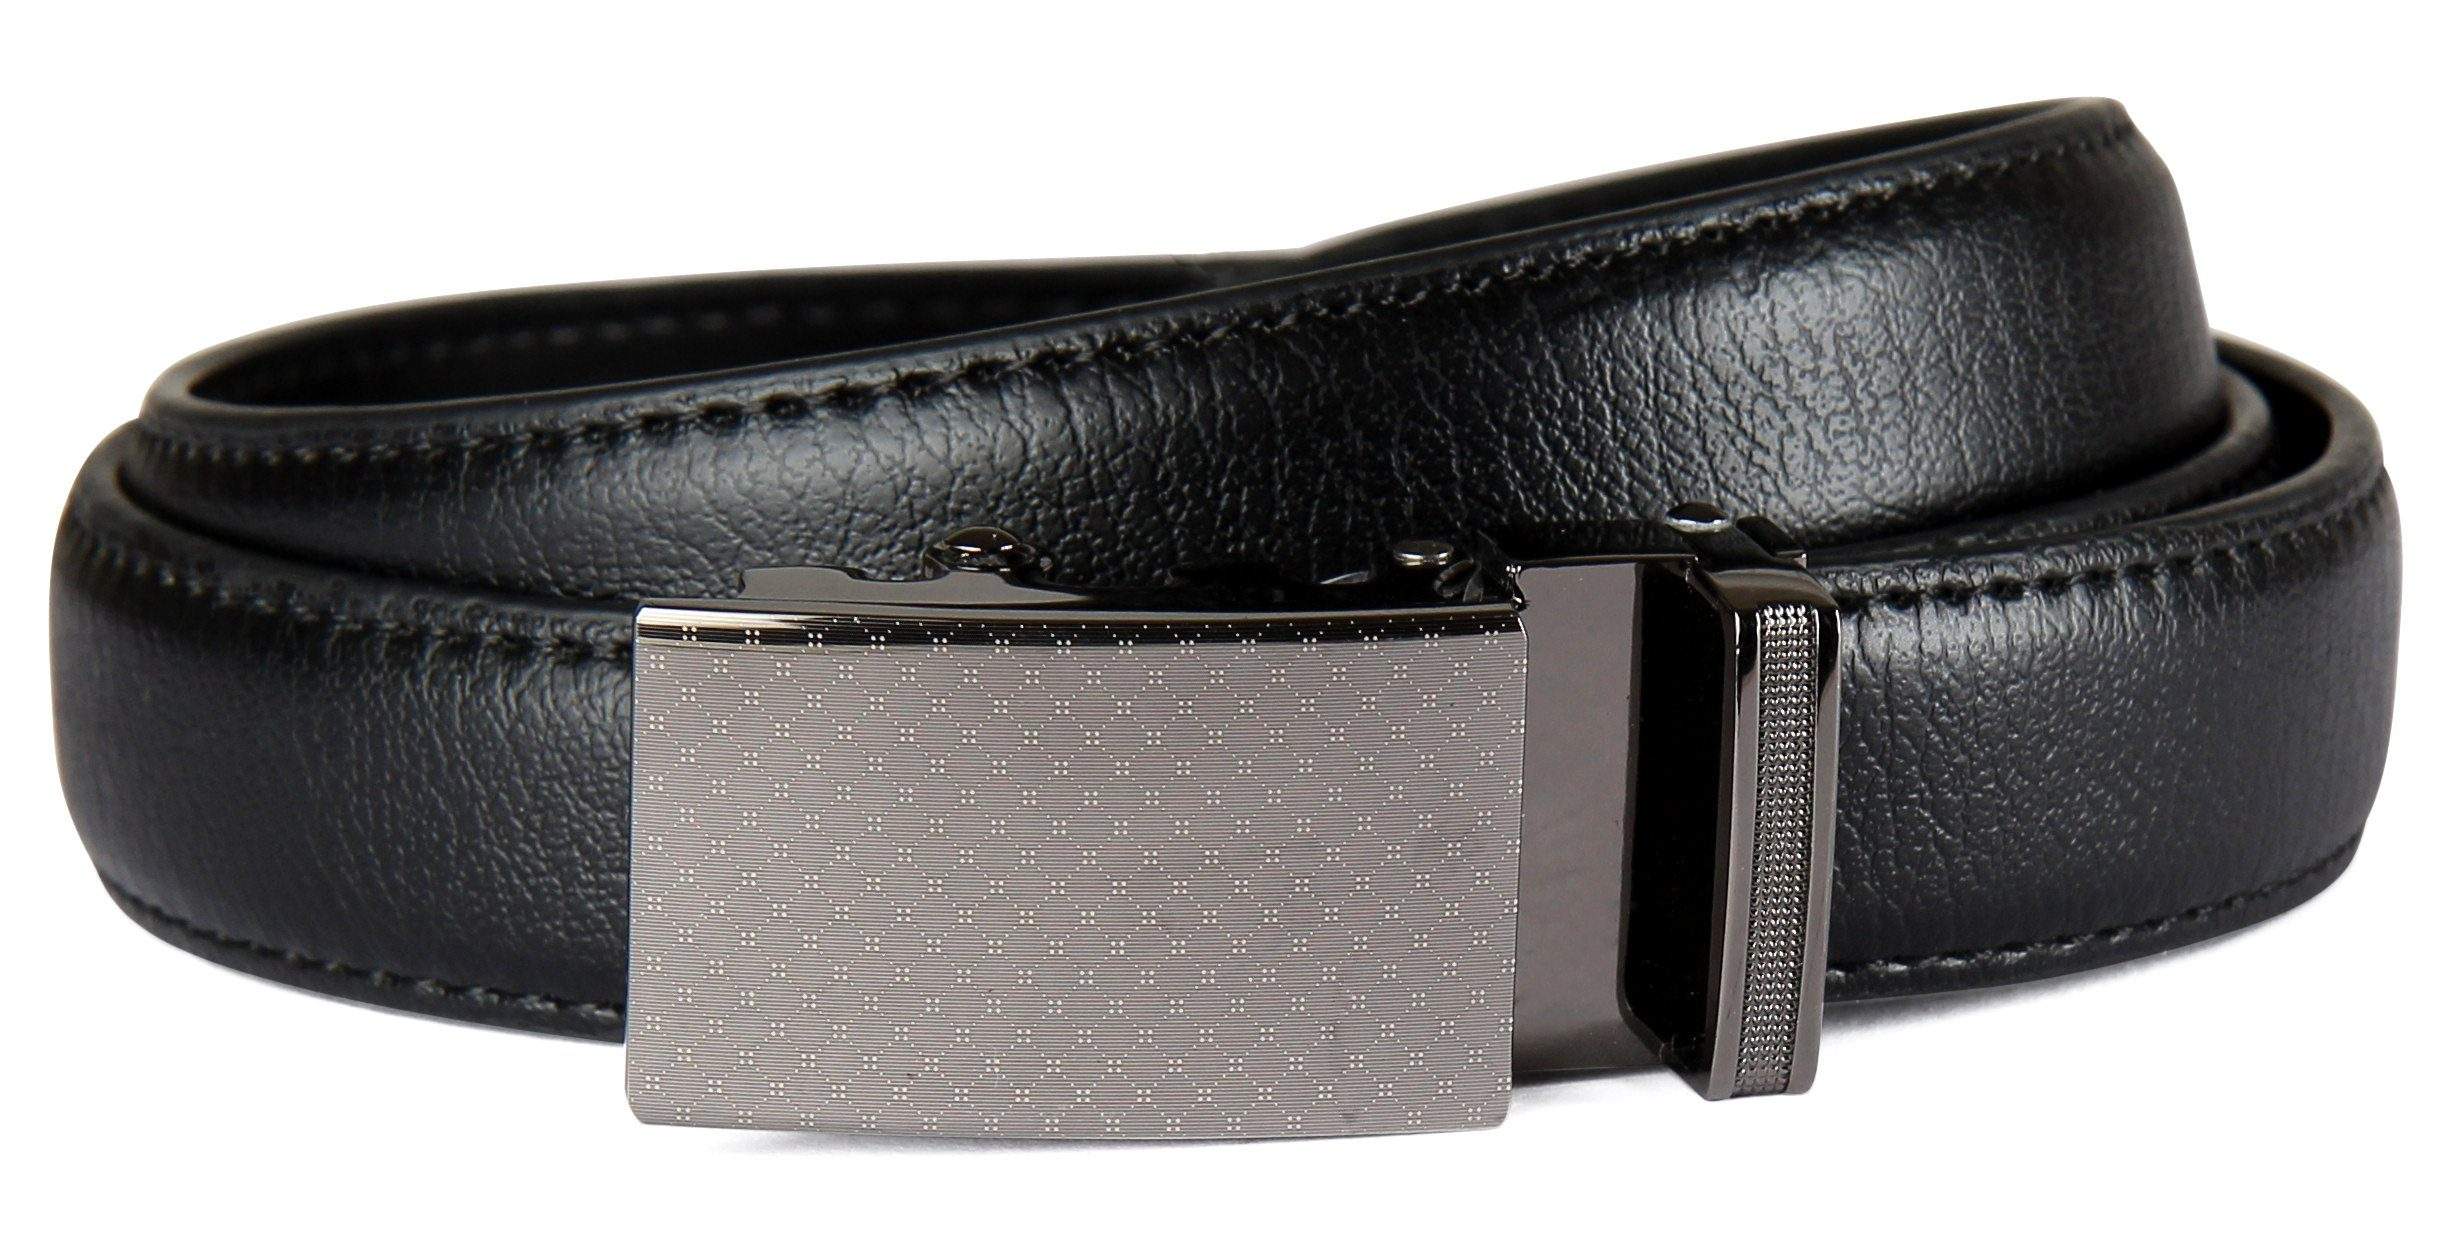 Buy online Black Leather Belt from Accessories for Men by Brussel for ₹419  at 58% off